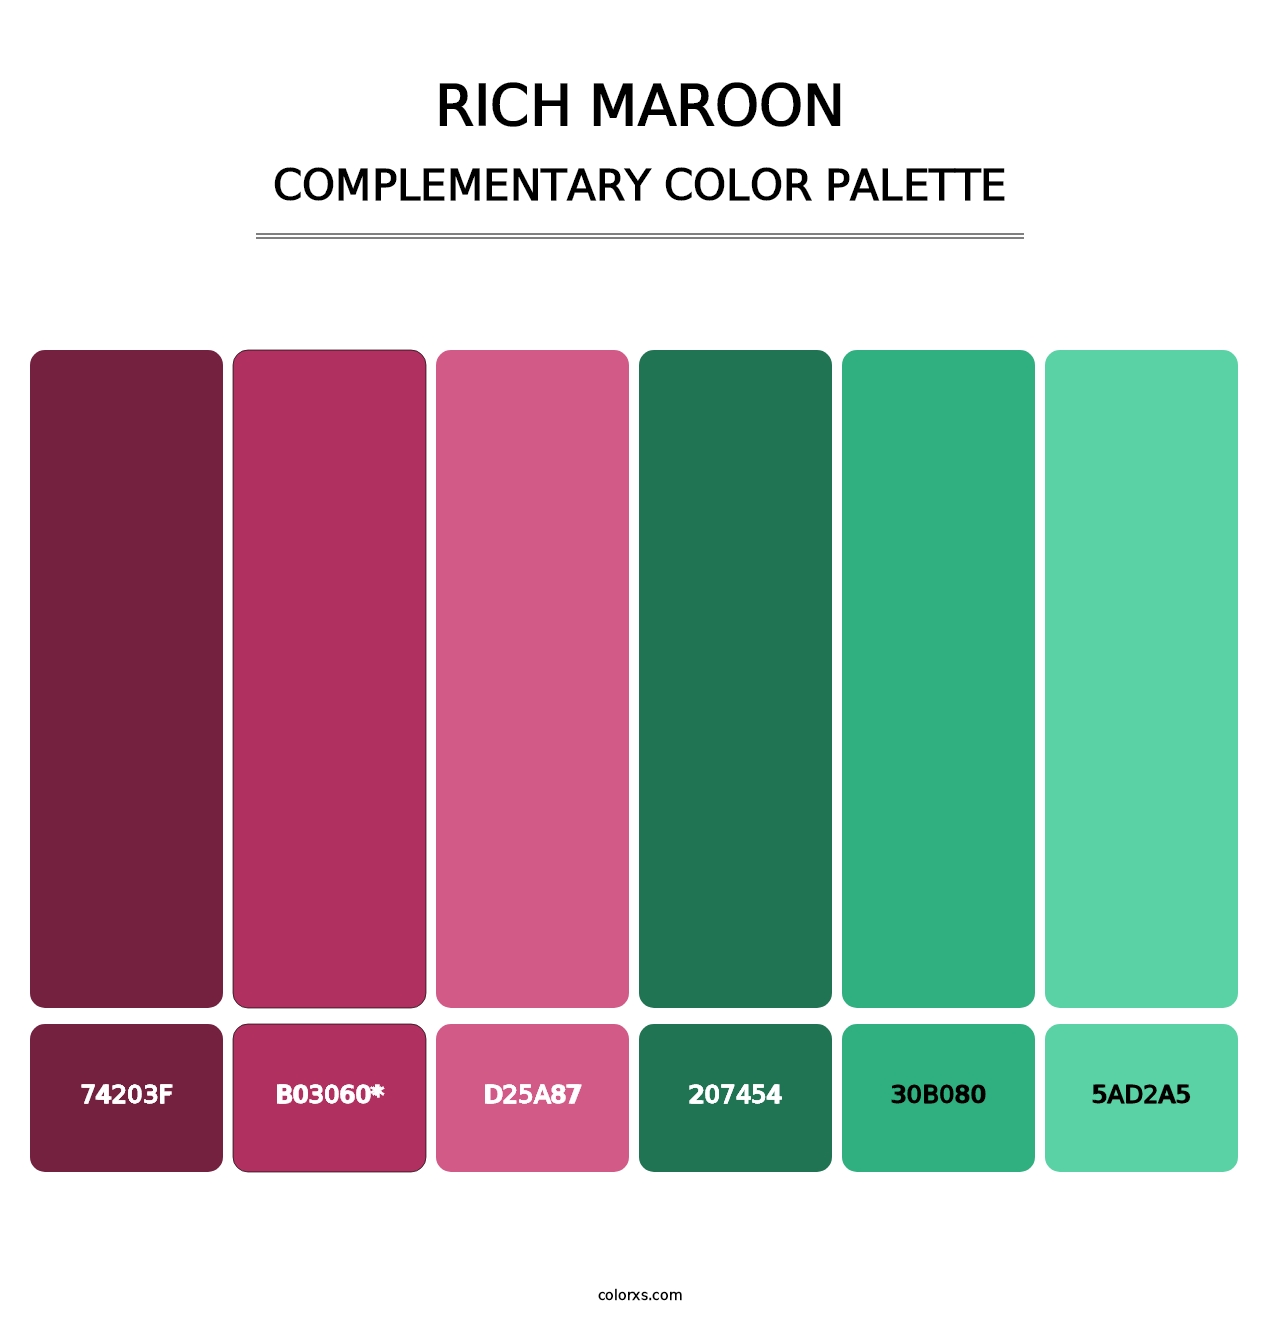 Rich Maroon - Complementary Color Palette